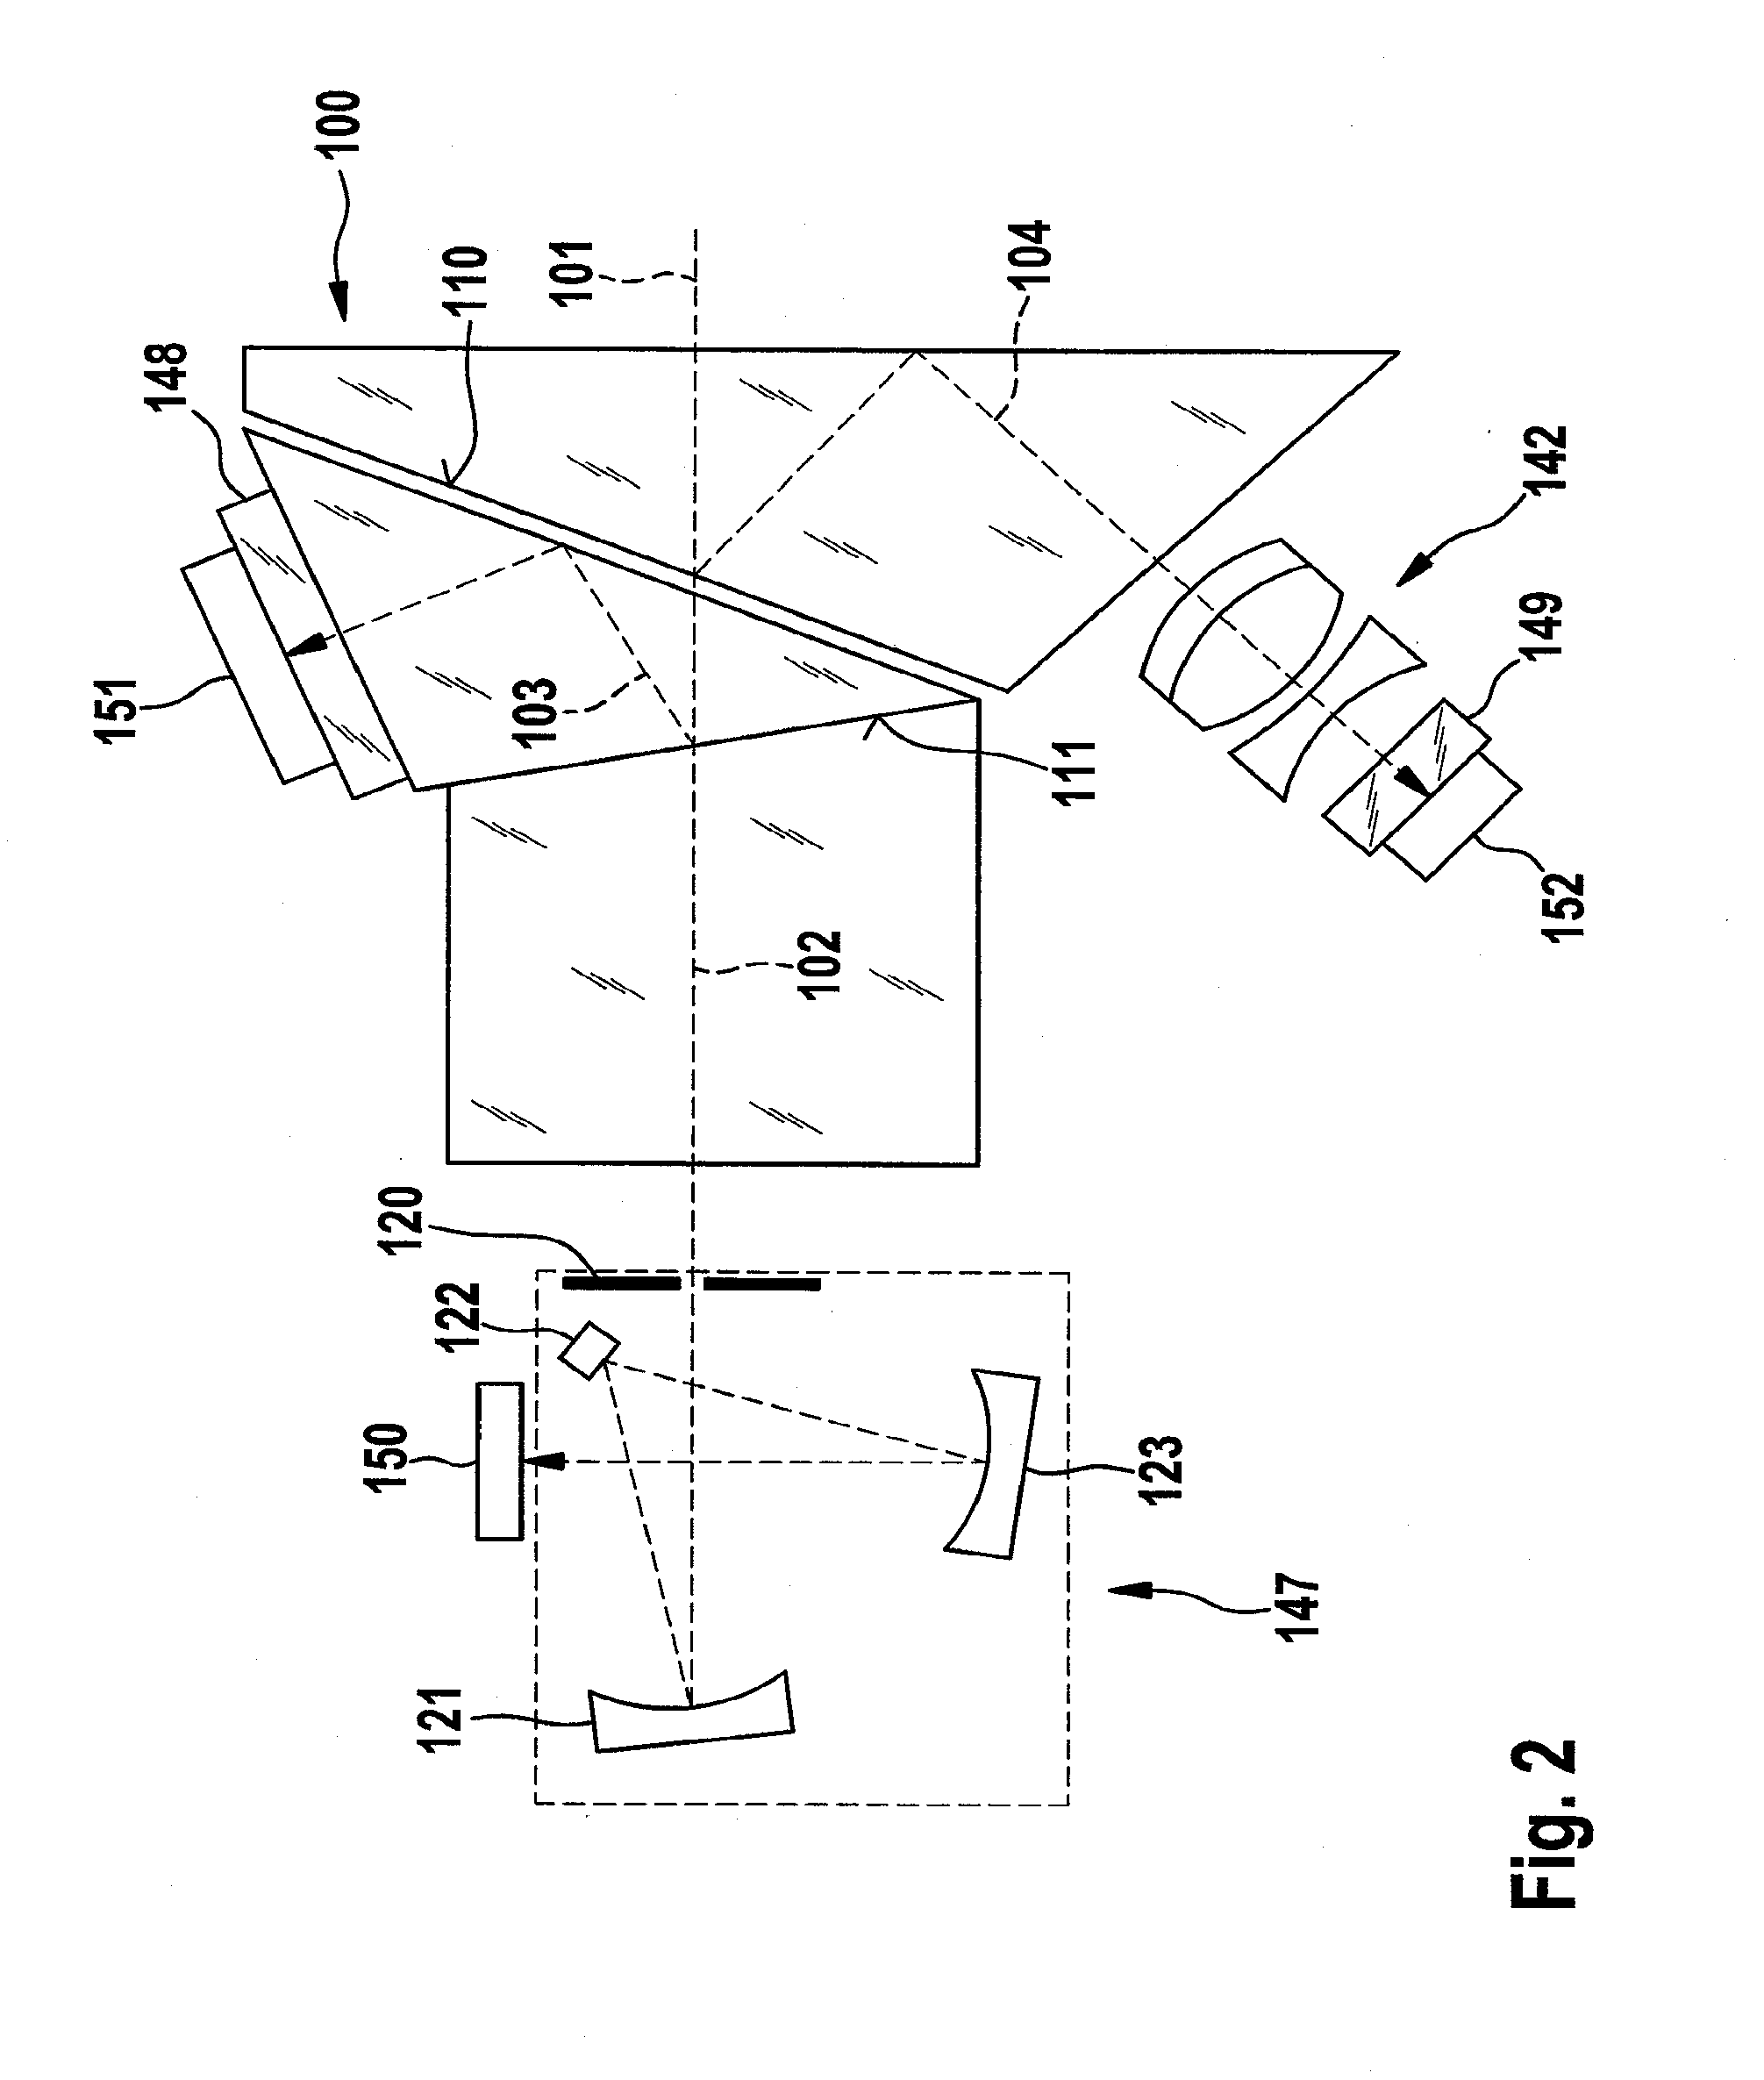 Apparatus and method for endoscopic 3D data collection